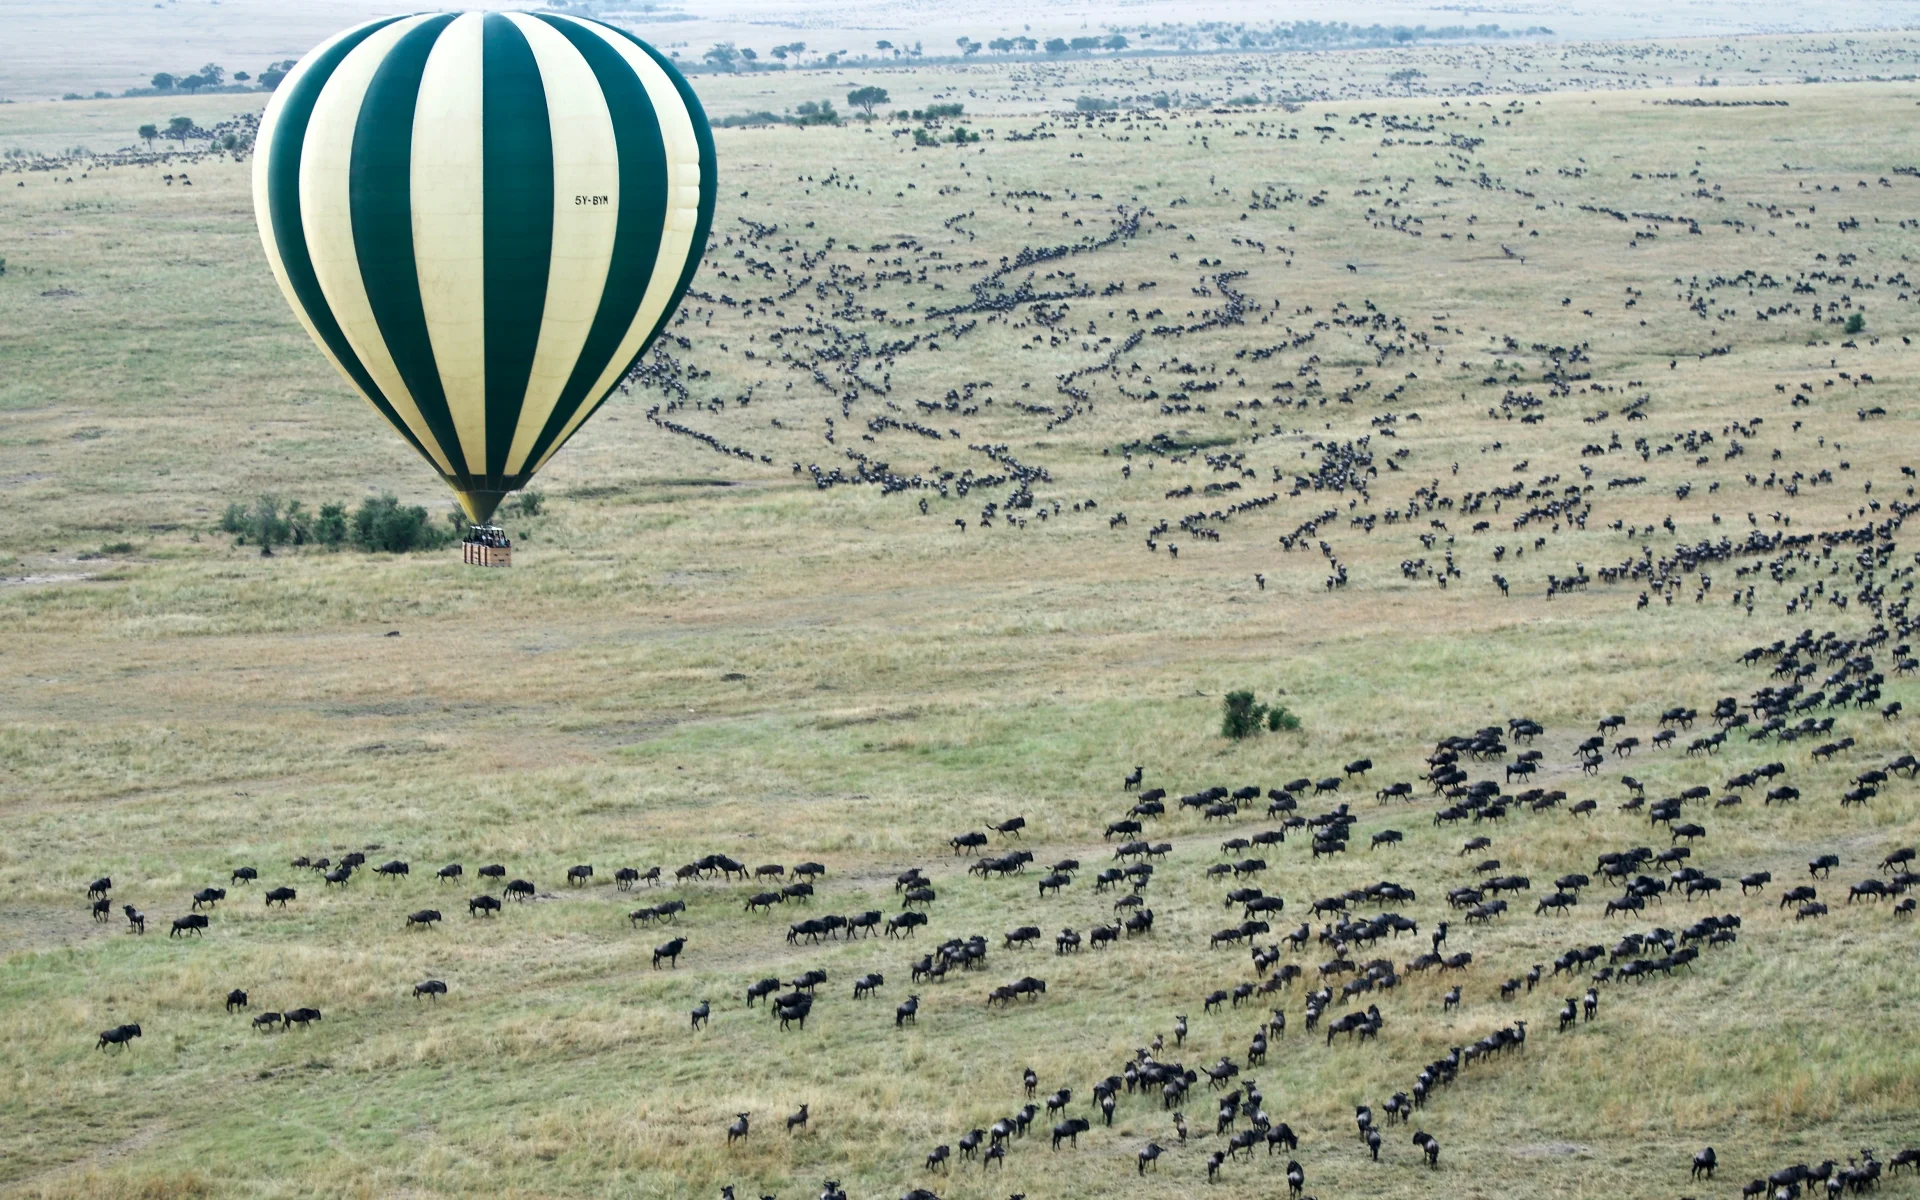 A hot air balloon flying over thousands of wildebeest over the Masai Mara in Kenya.